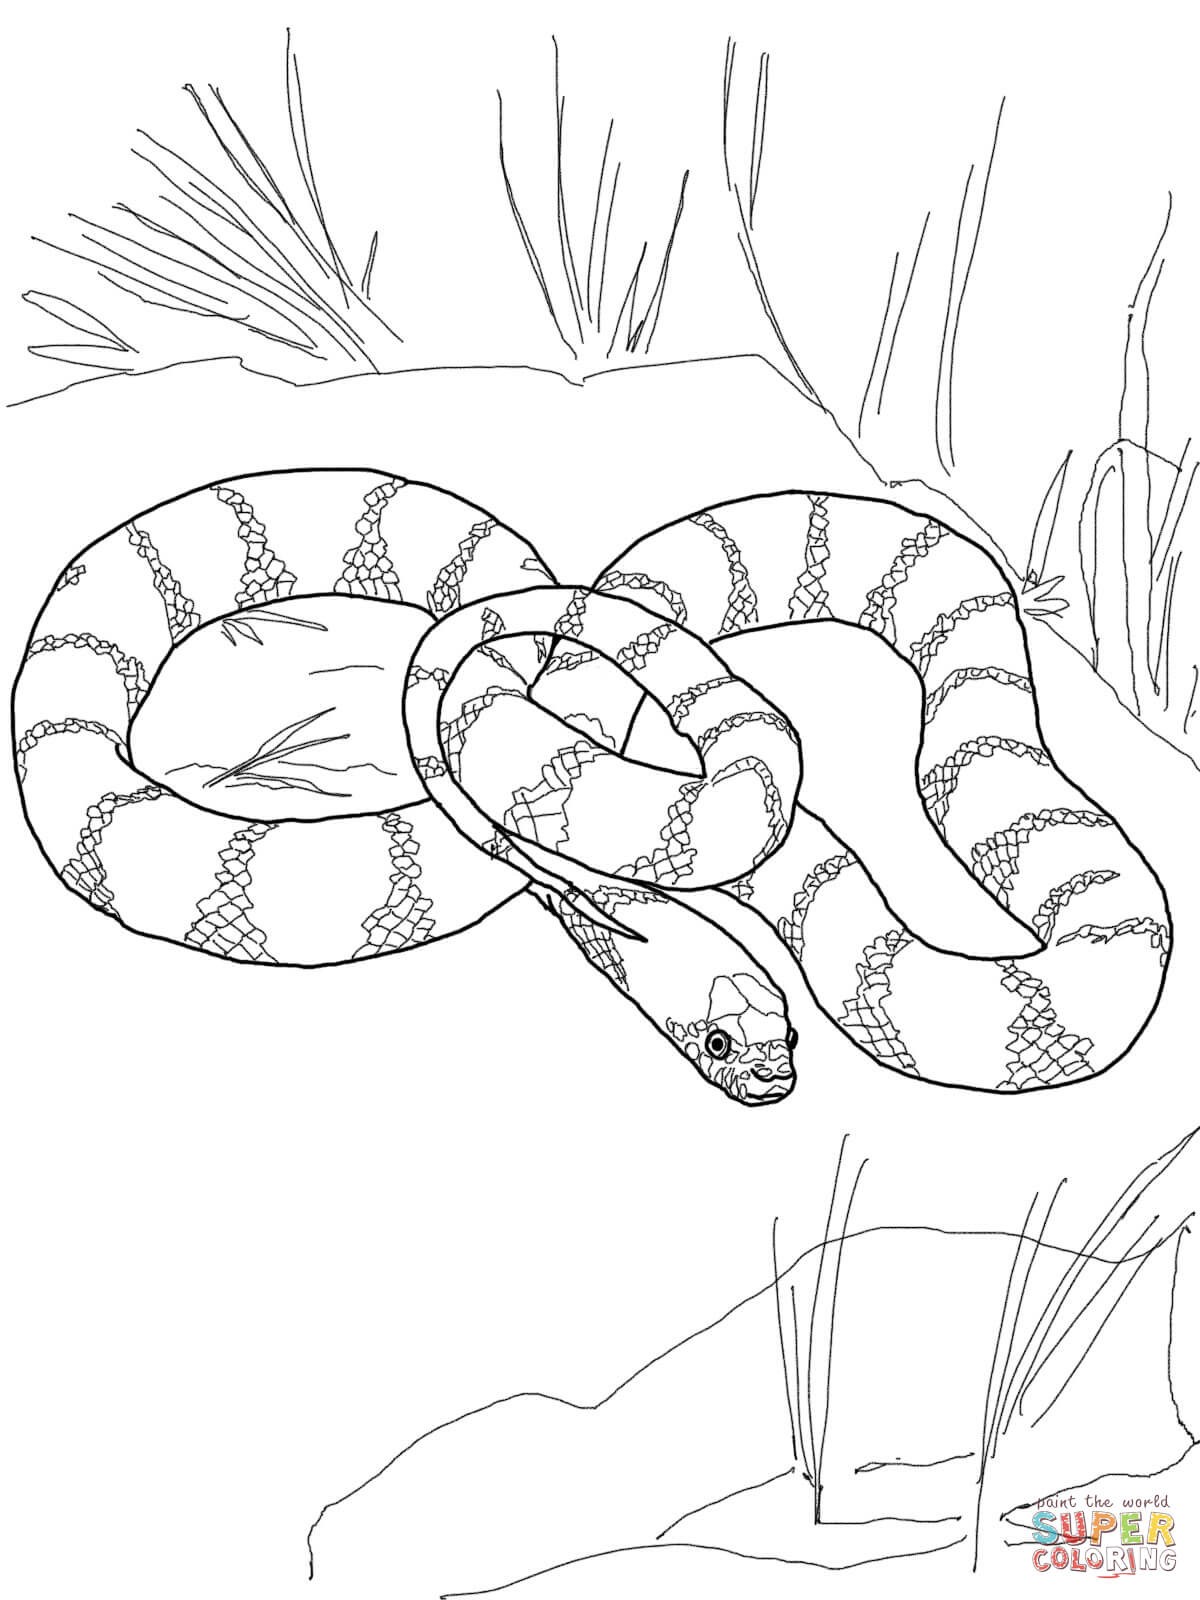 coloring : King Cobra Coloring Page New Snakes Coloring Pages King Cobra Coloring  Page ~ queens